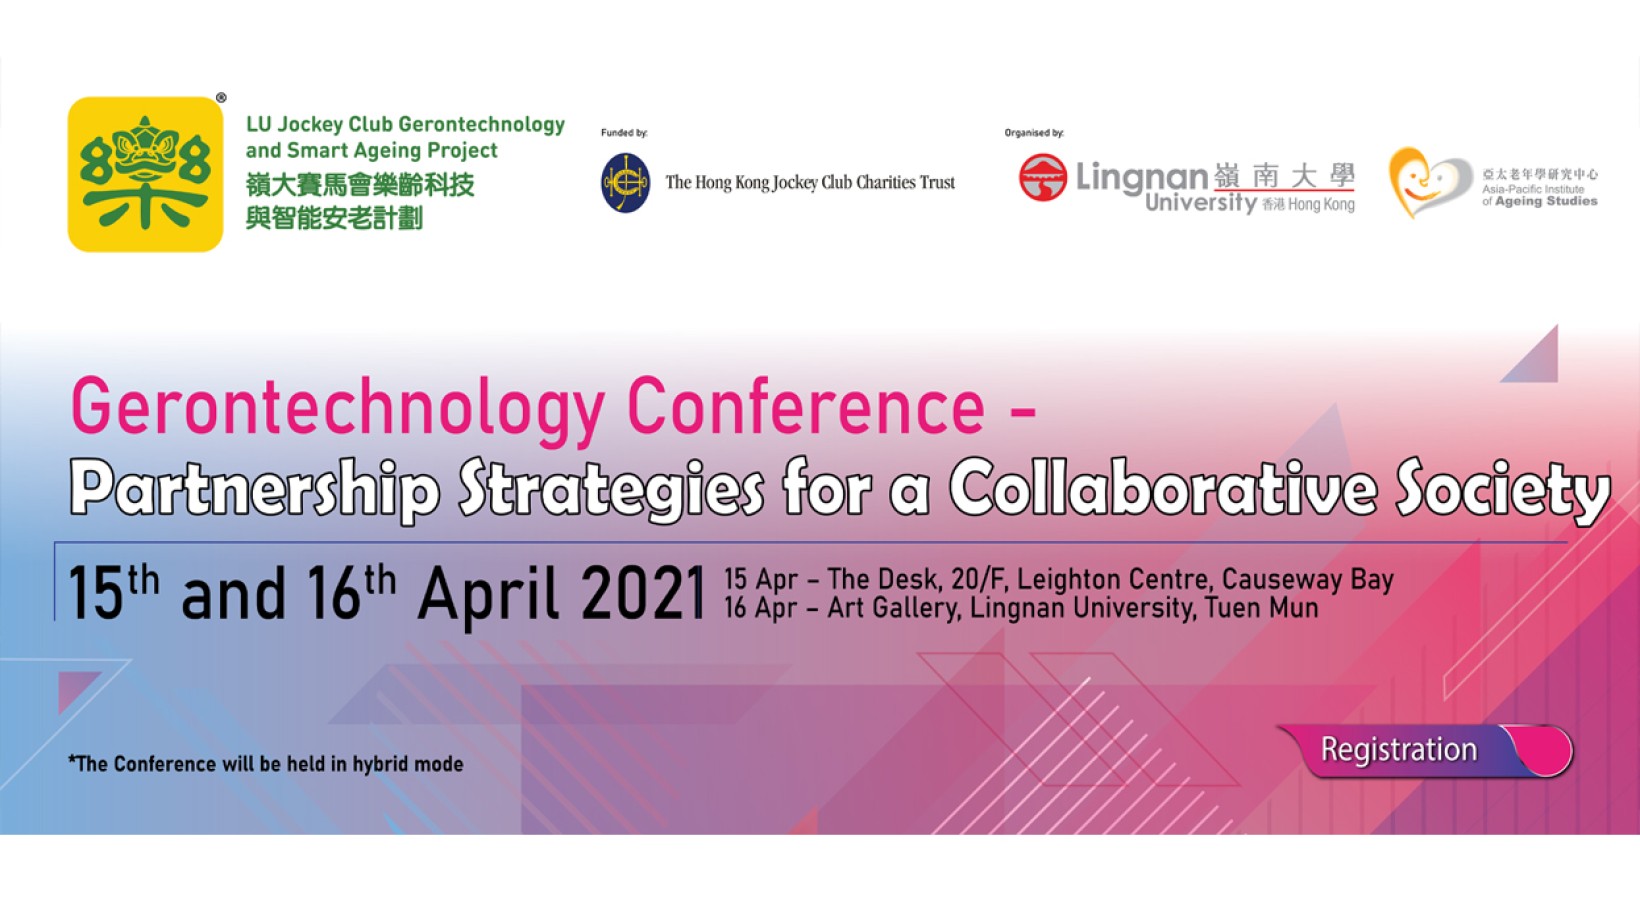 Gerontechnology Conference - Partnership Strategies for a Collaborative Society